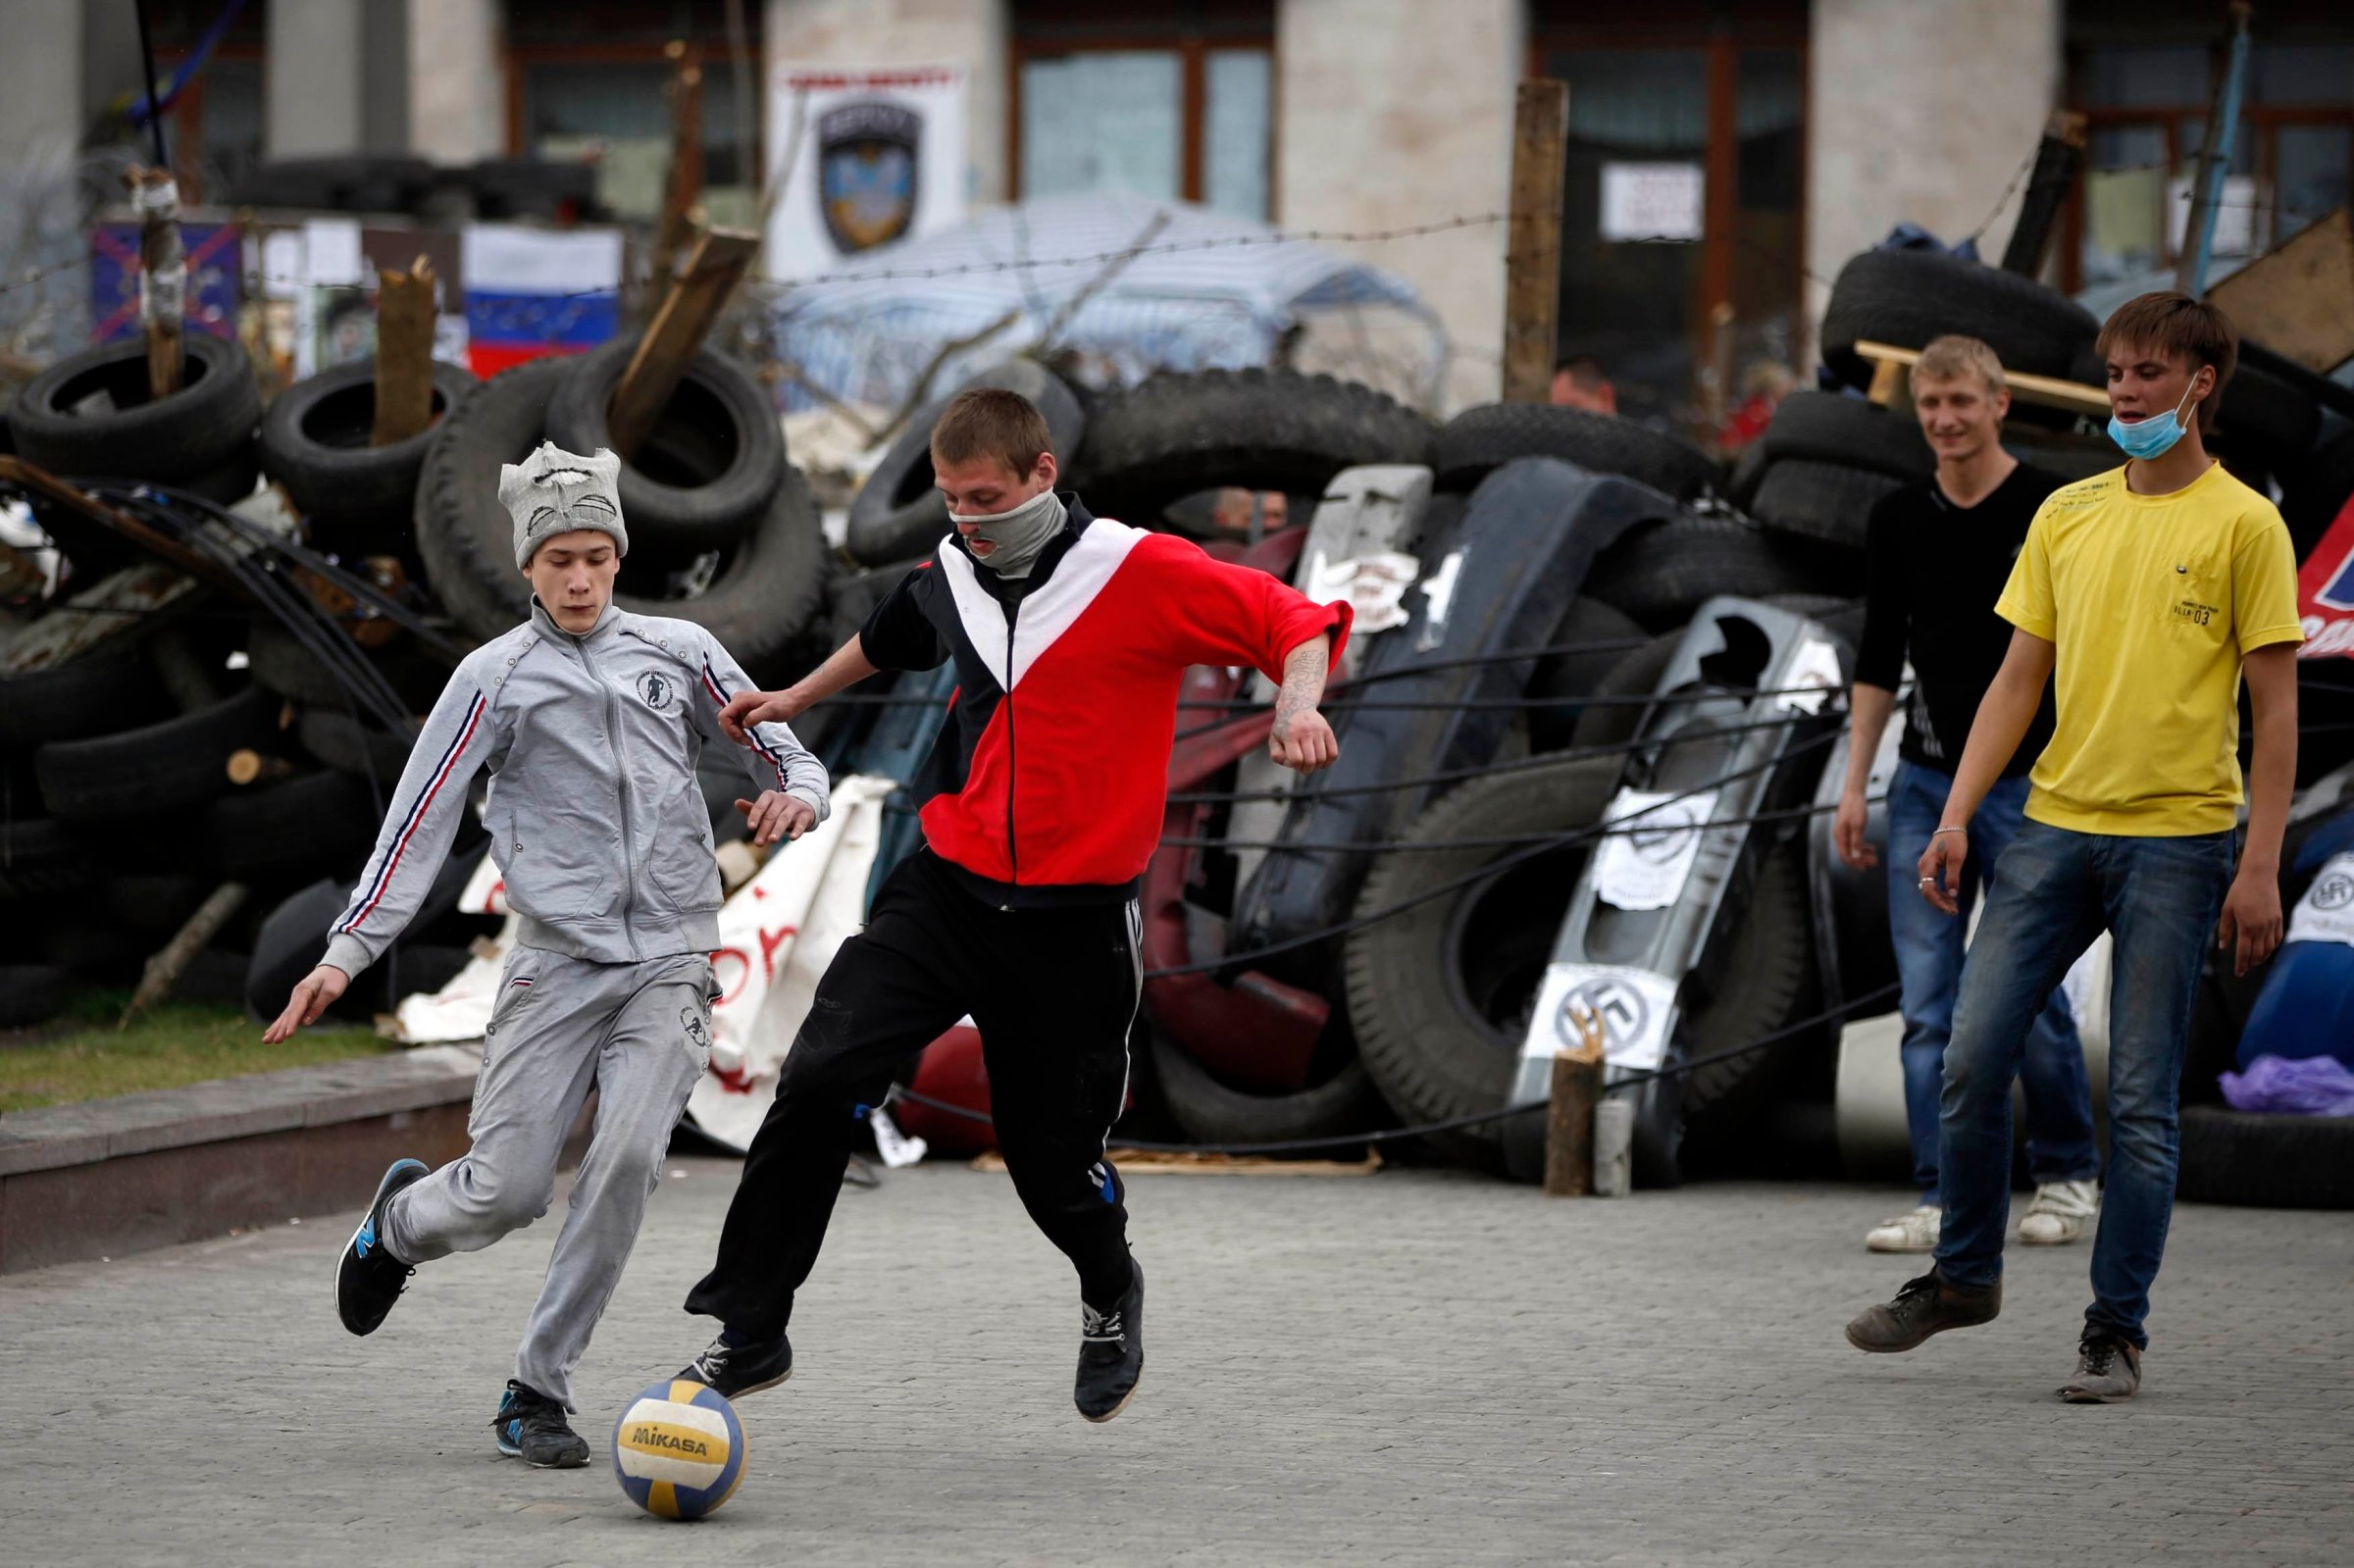 Pro-Russian protesters play soccer in front of a barricade outside a regional government building in Donetsk, eastern Ukraine April 19, 2014.